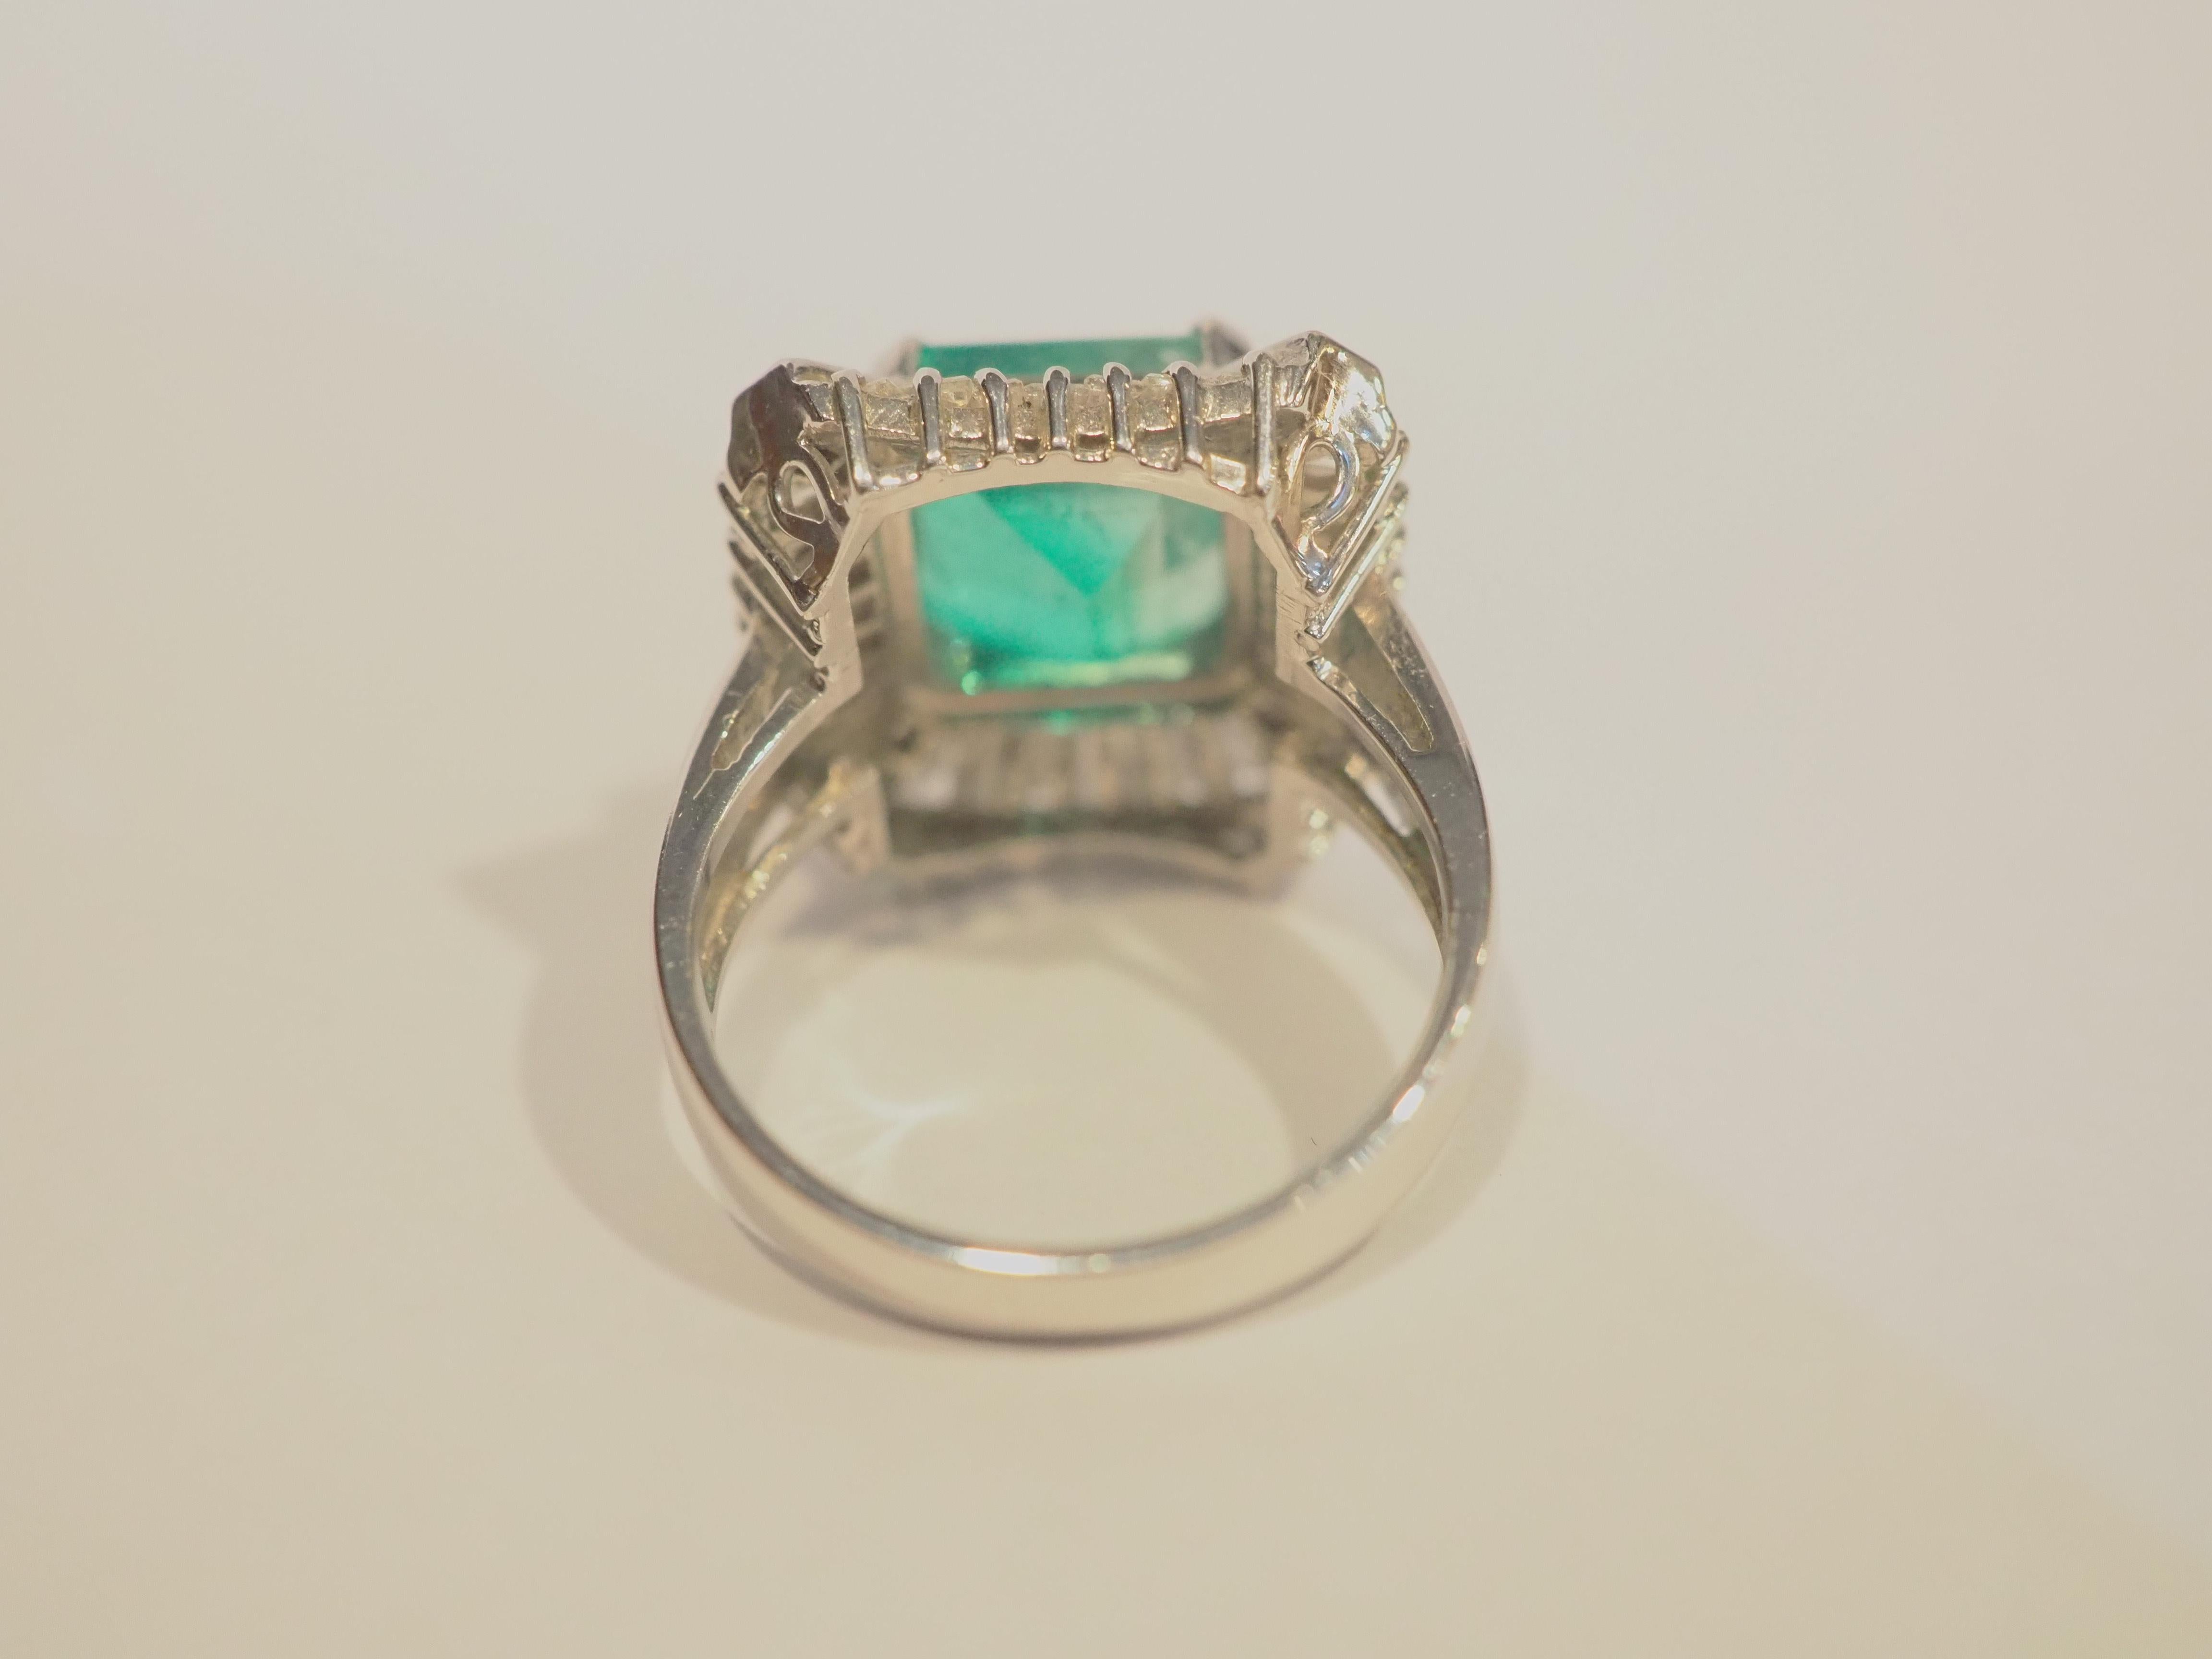 18K White Gold 4.68ct Colombian Emerald & 1.65ct Diamond Cocktail Ring In Excellent Condition For Sale In เกาะสมุย, TH